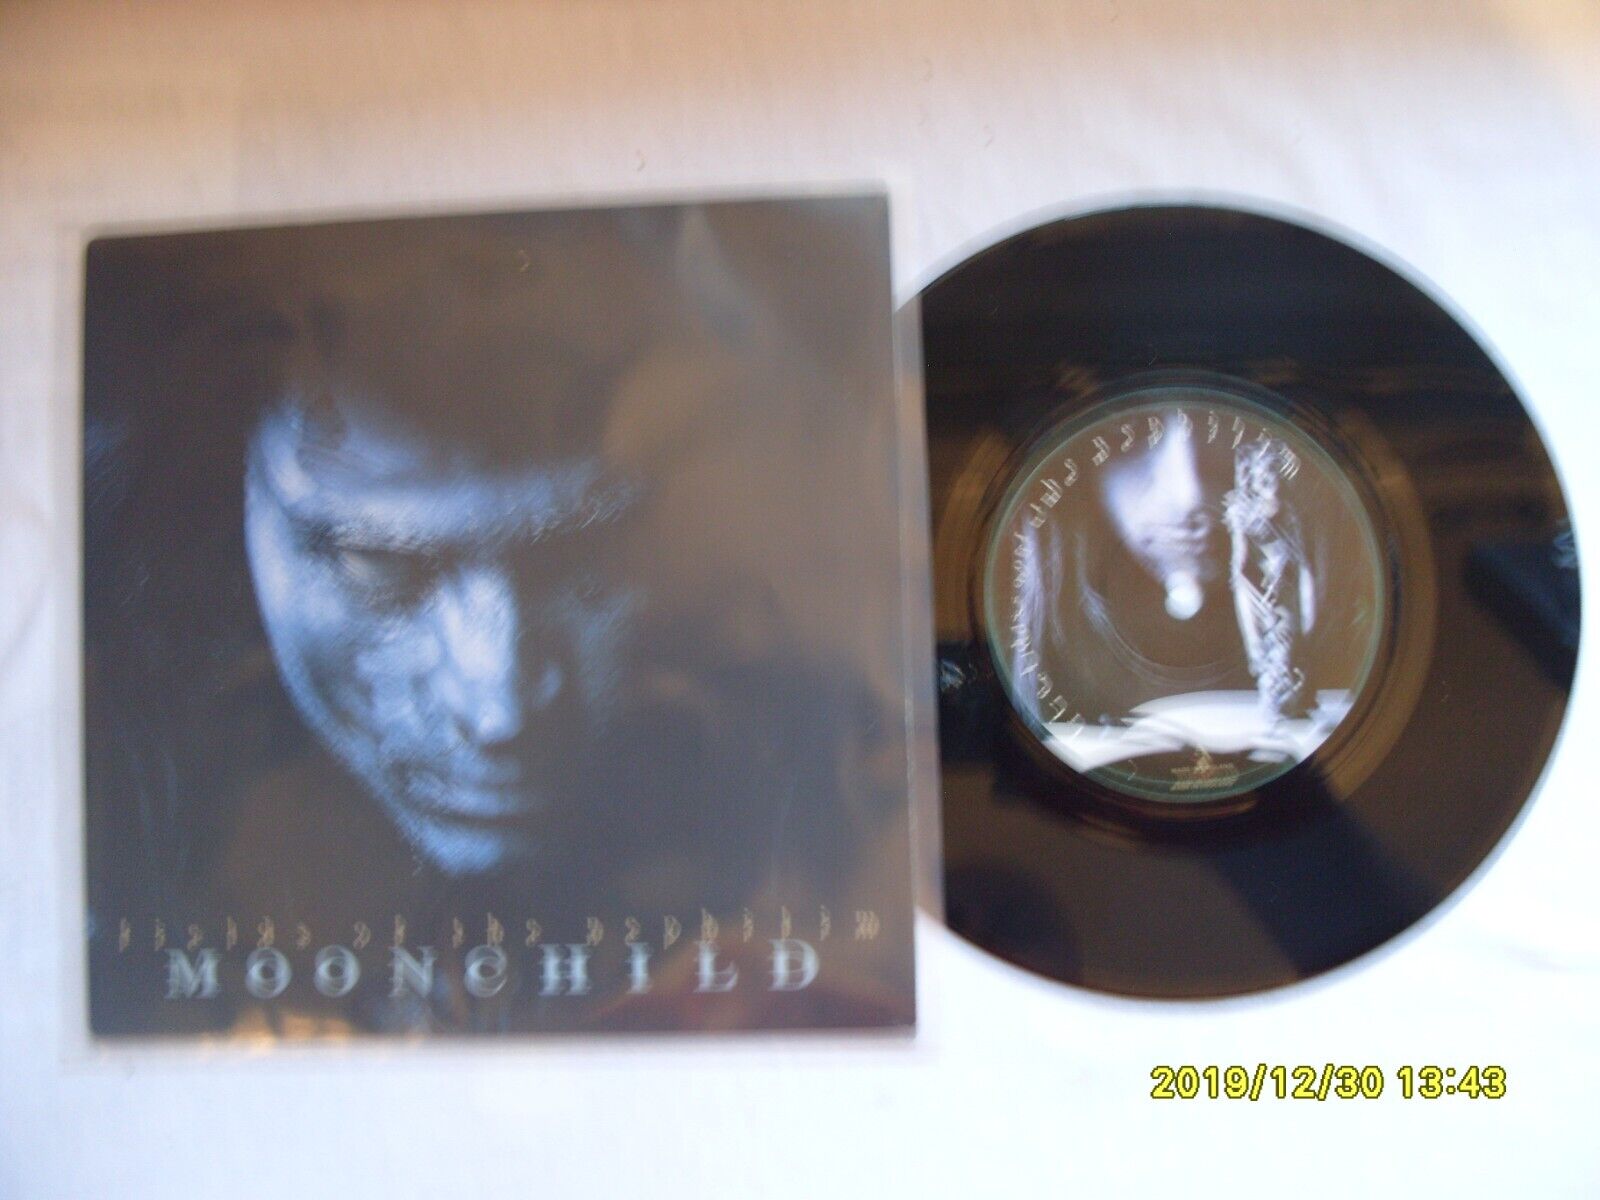 FIELDS OF THE NEPHILIM MOONCHILD SITUATION TWO RECORDS UK 7" VINYL SINGLE in P/S